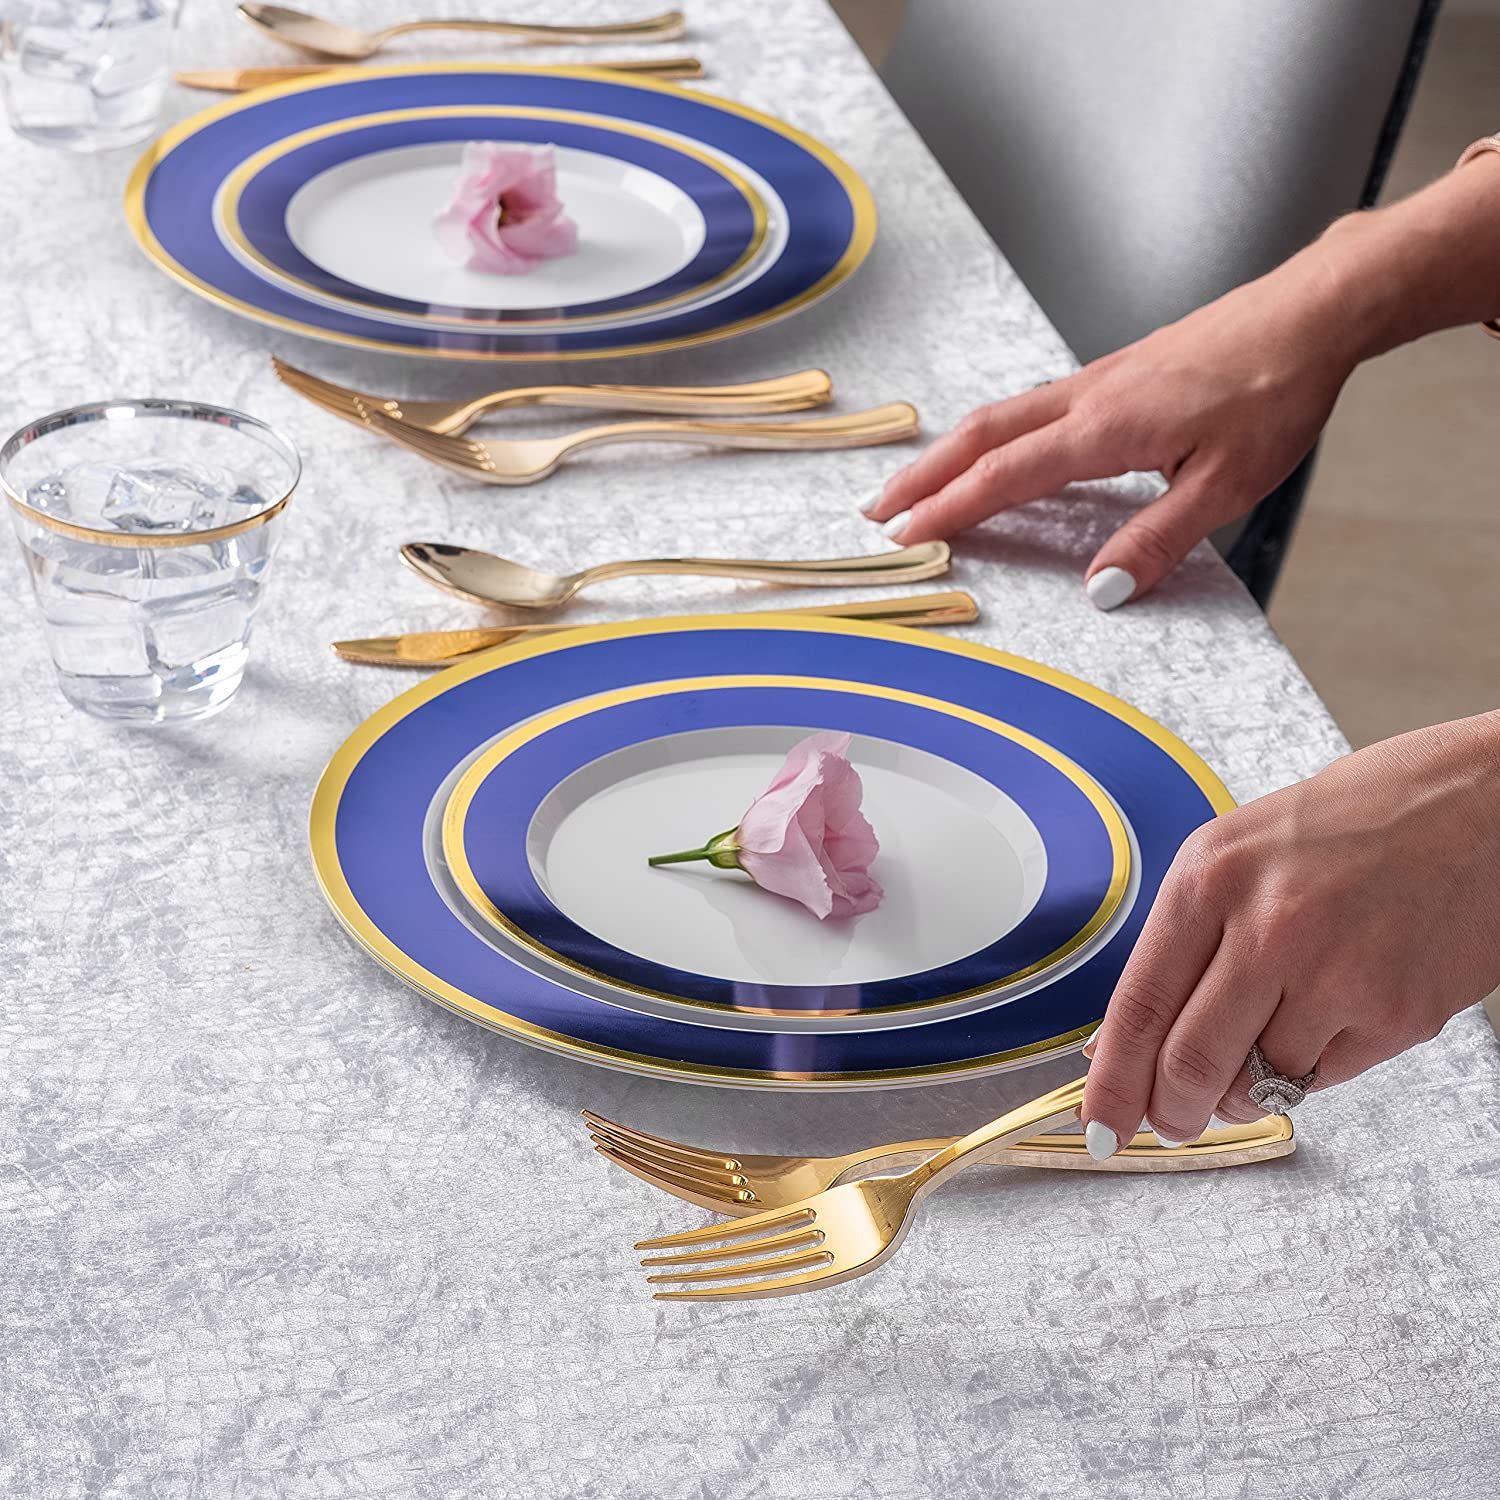 The Best Disposable Plates